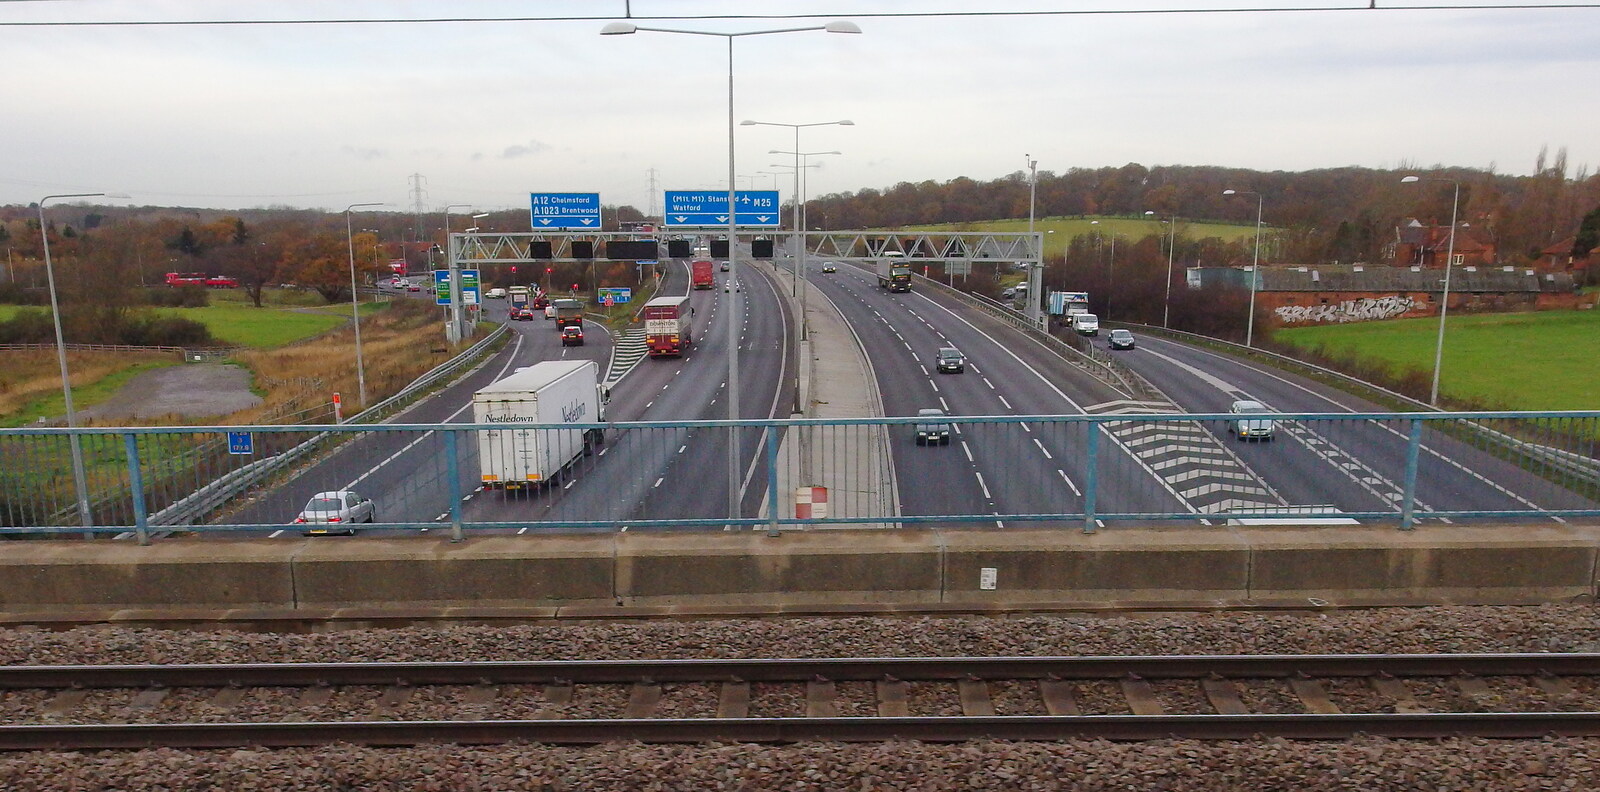 The M25 as seen from the train from SwiftKey's Arcade Cabinet, and the Streets of Southwark, London - 5th December 2013